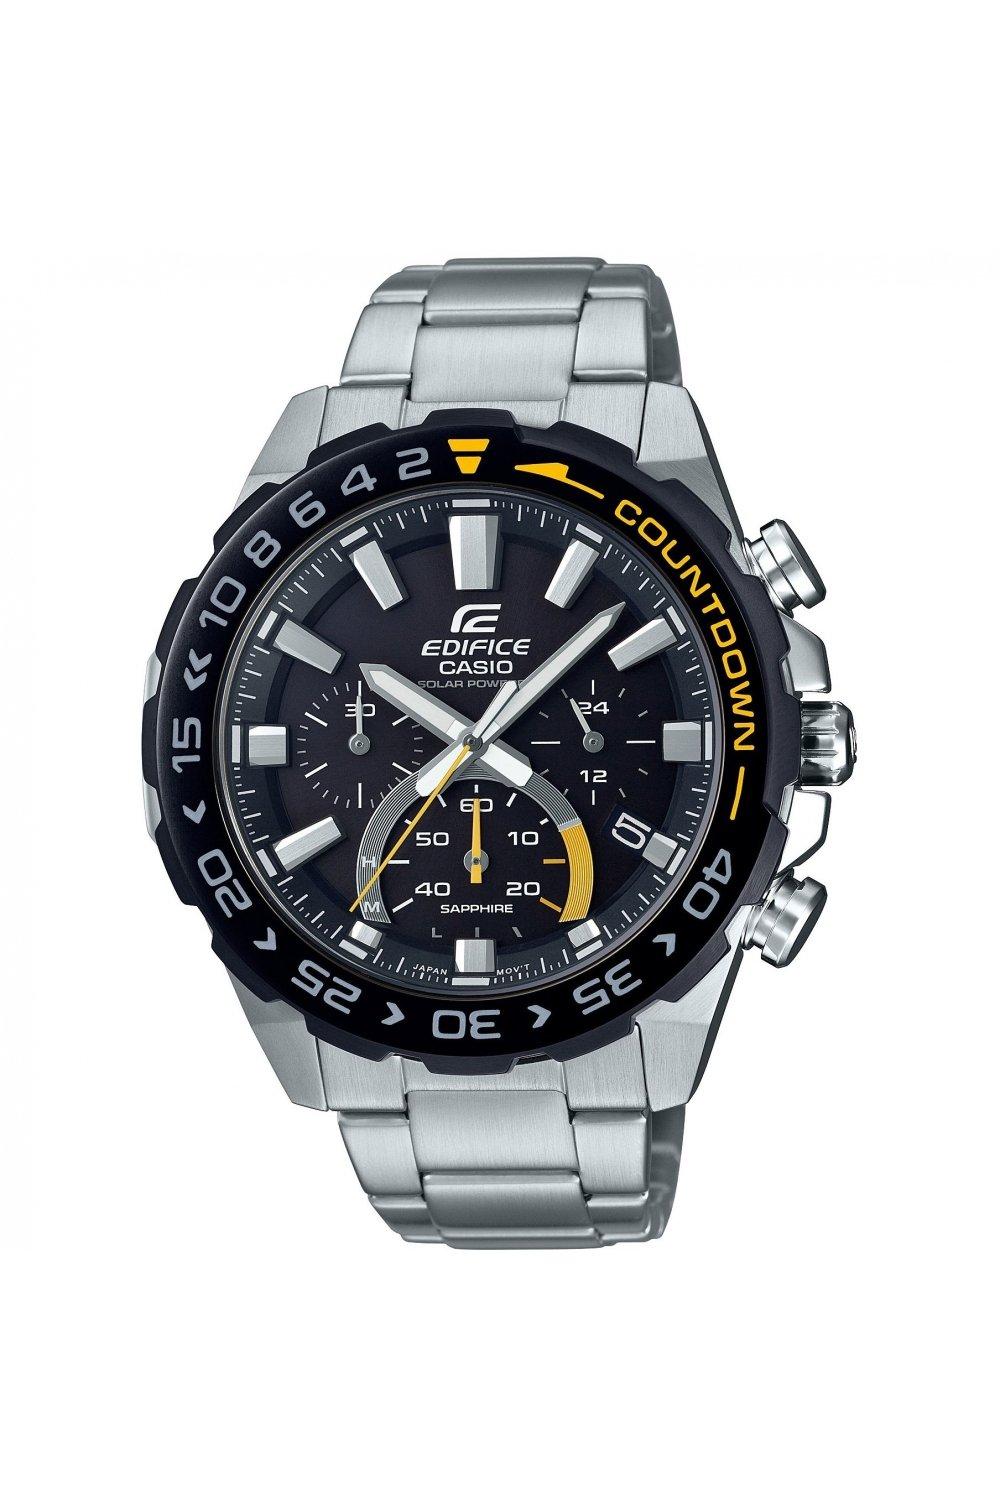 edifice stainless steel classic analogue watch - efs-s550db-1avuef